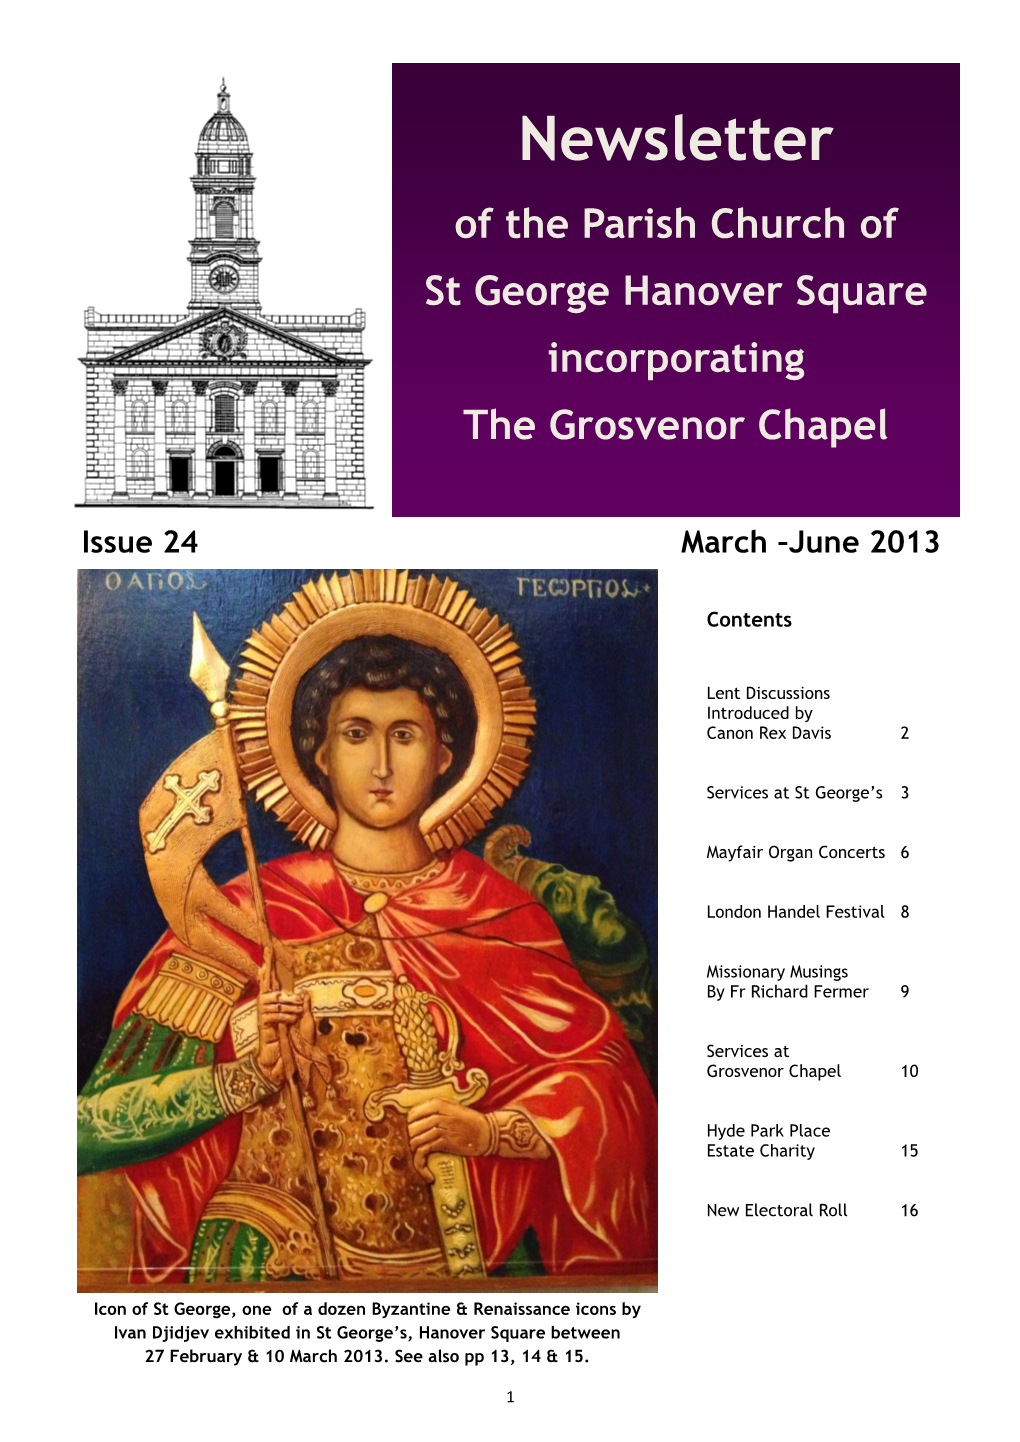 Newsletter of the Parish Church of St George Hanover Square Incorporating the Grosvenor Chapel